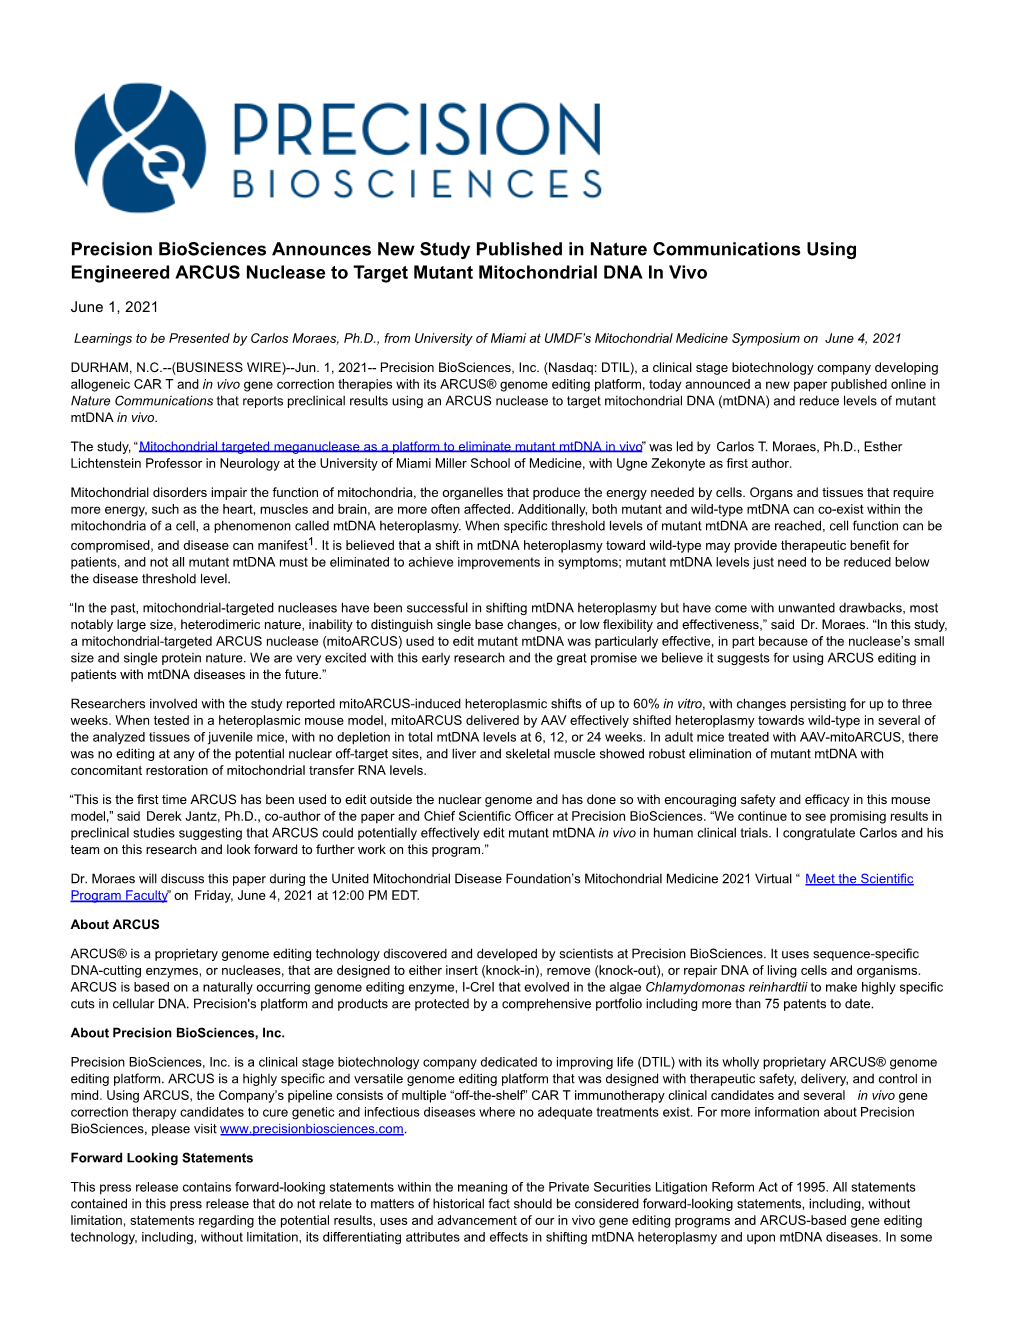 Precision Biosciences Announces New Study Published in Nature Communications Using Engineered ARCUS Nuclease to Target Mutant Mitochondrial DNA in Vivo